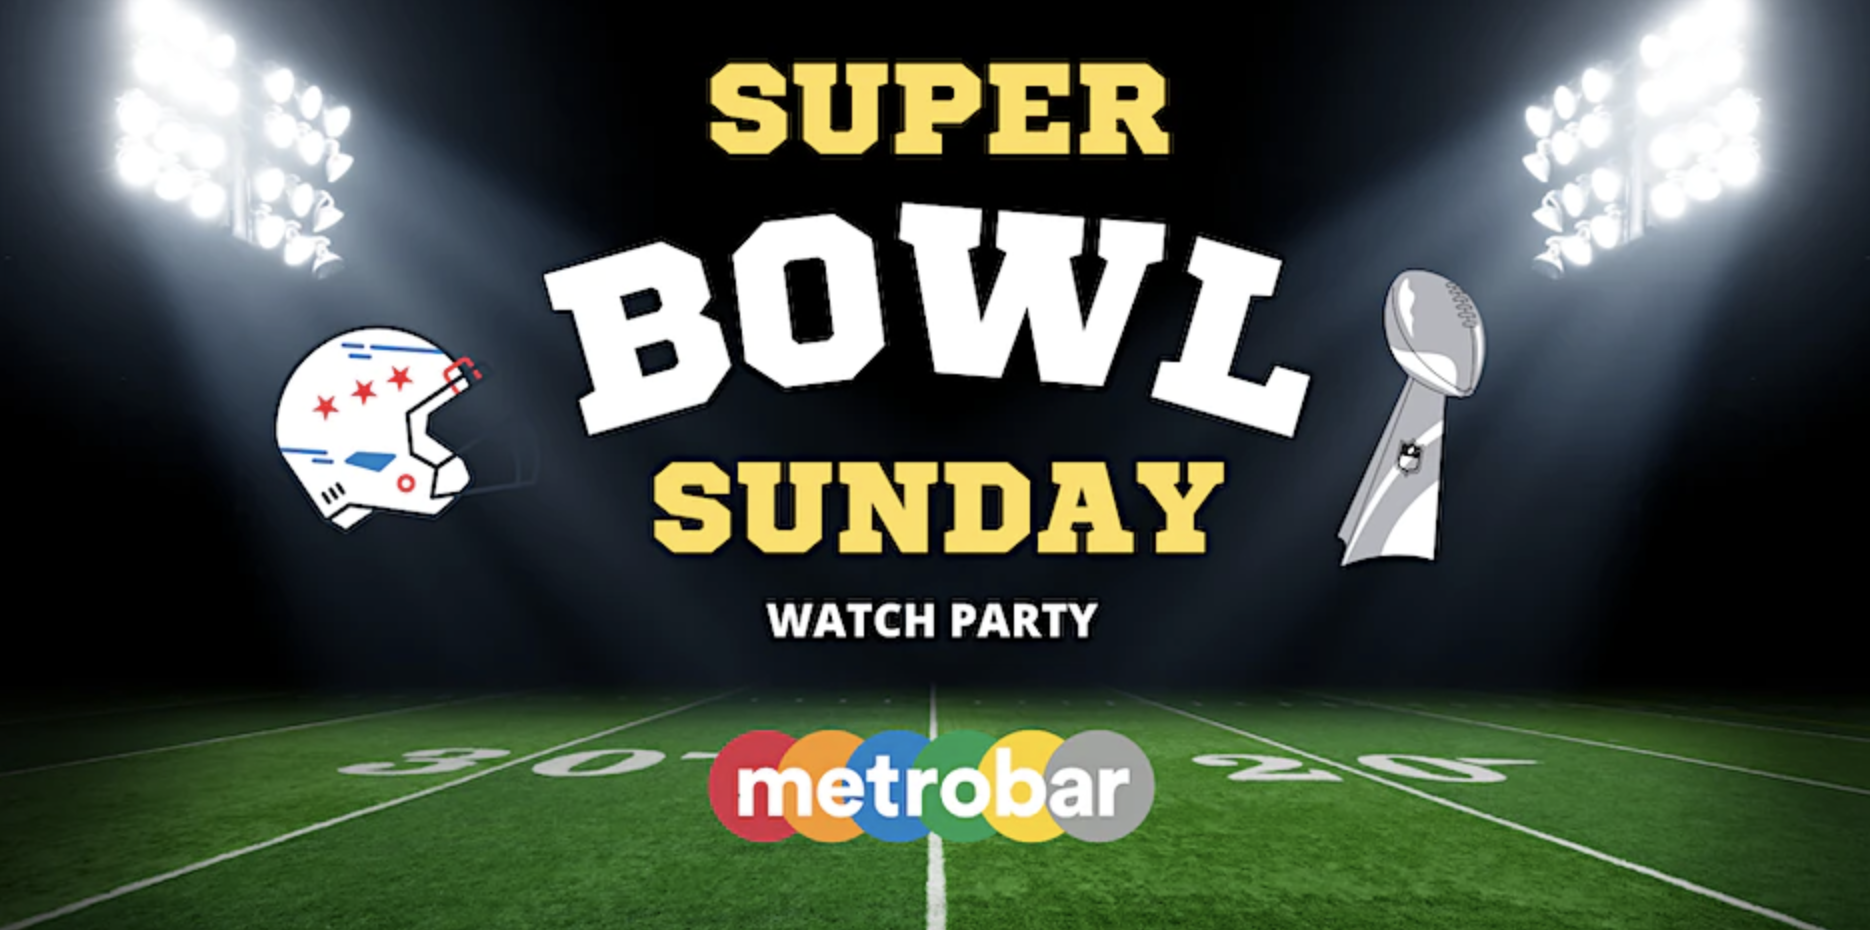 Super Bowl Sunday Watch Party